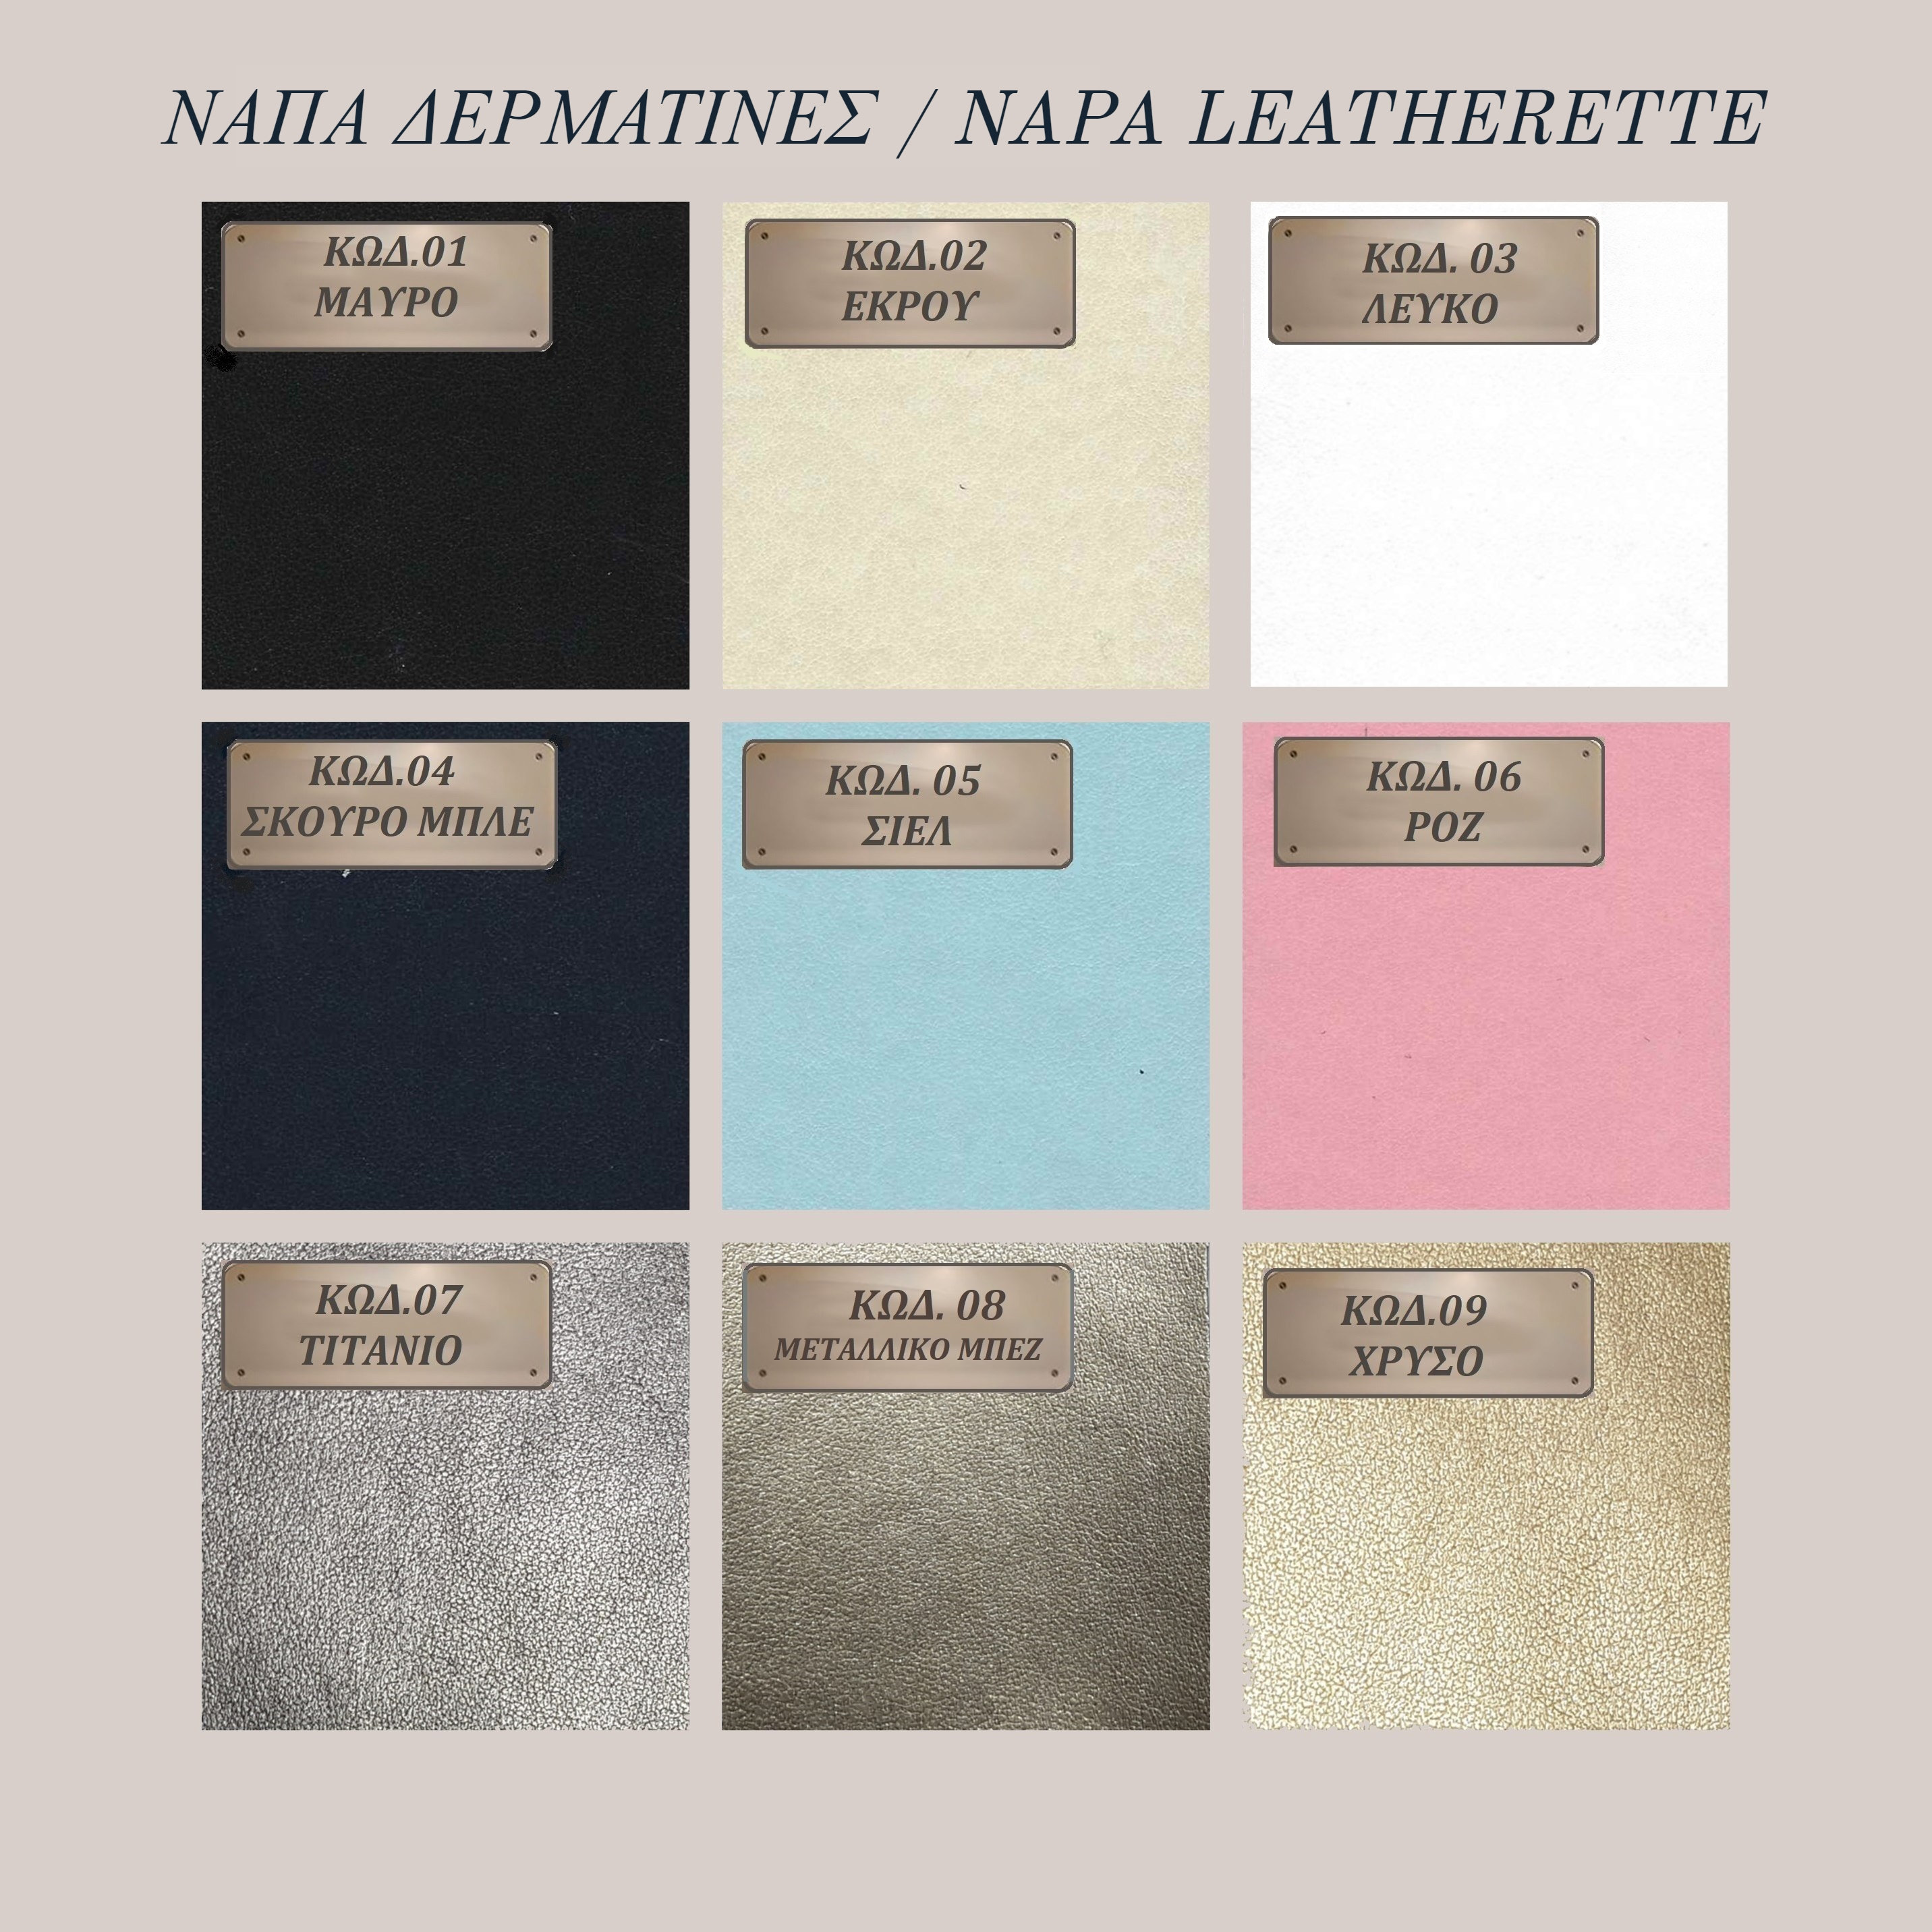 images/Items/Materials/05.NAPA LEATHERETTE.jpg